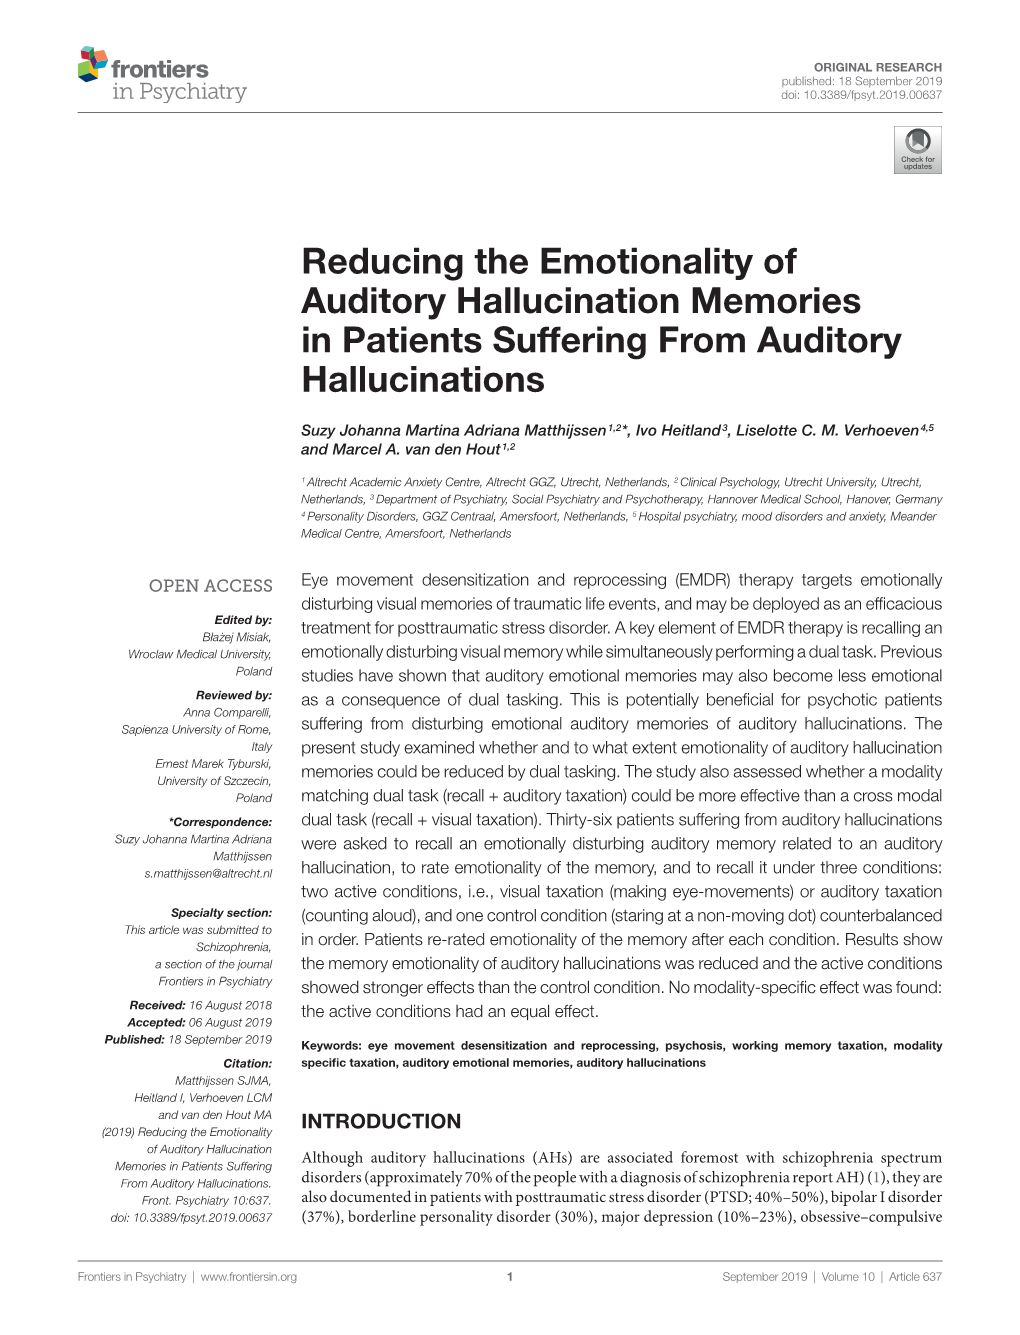 Reducing the Emotionality of Auditory Hallucination Reducing The